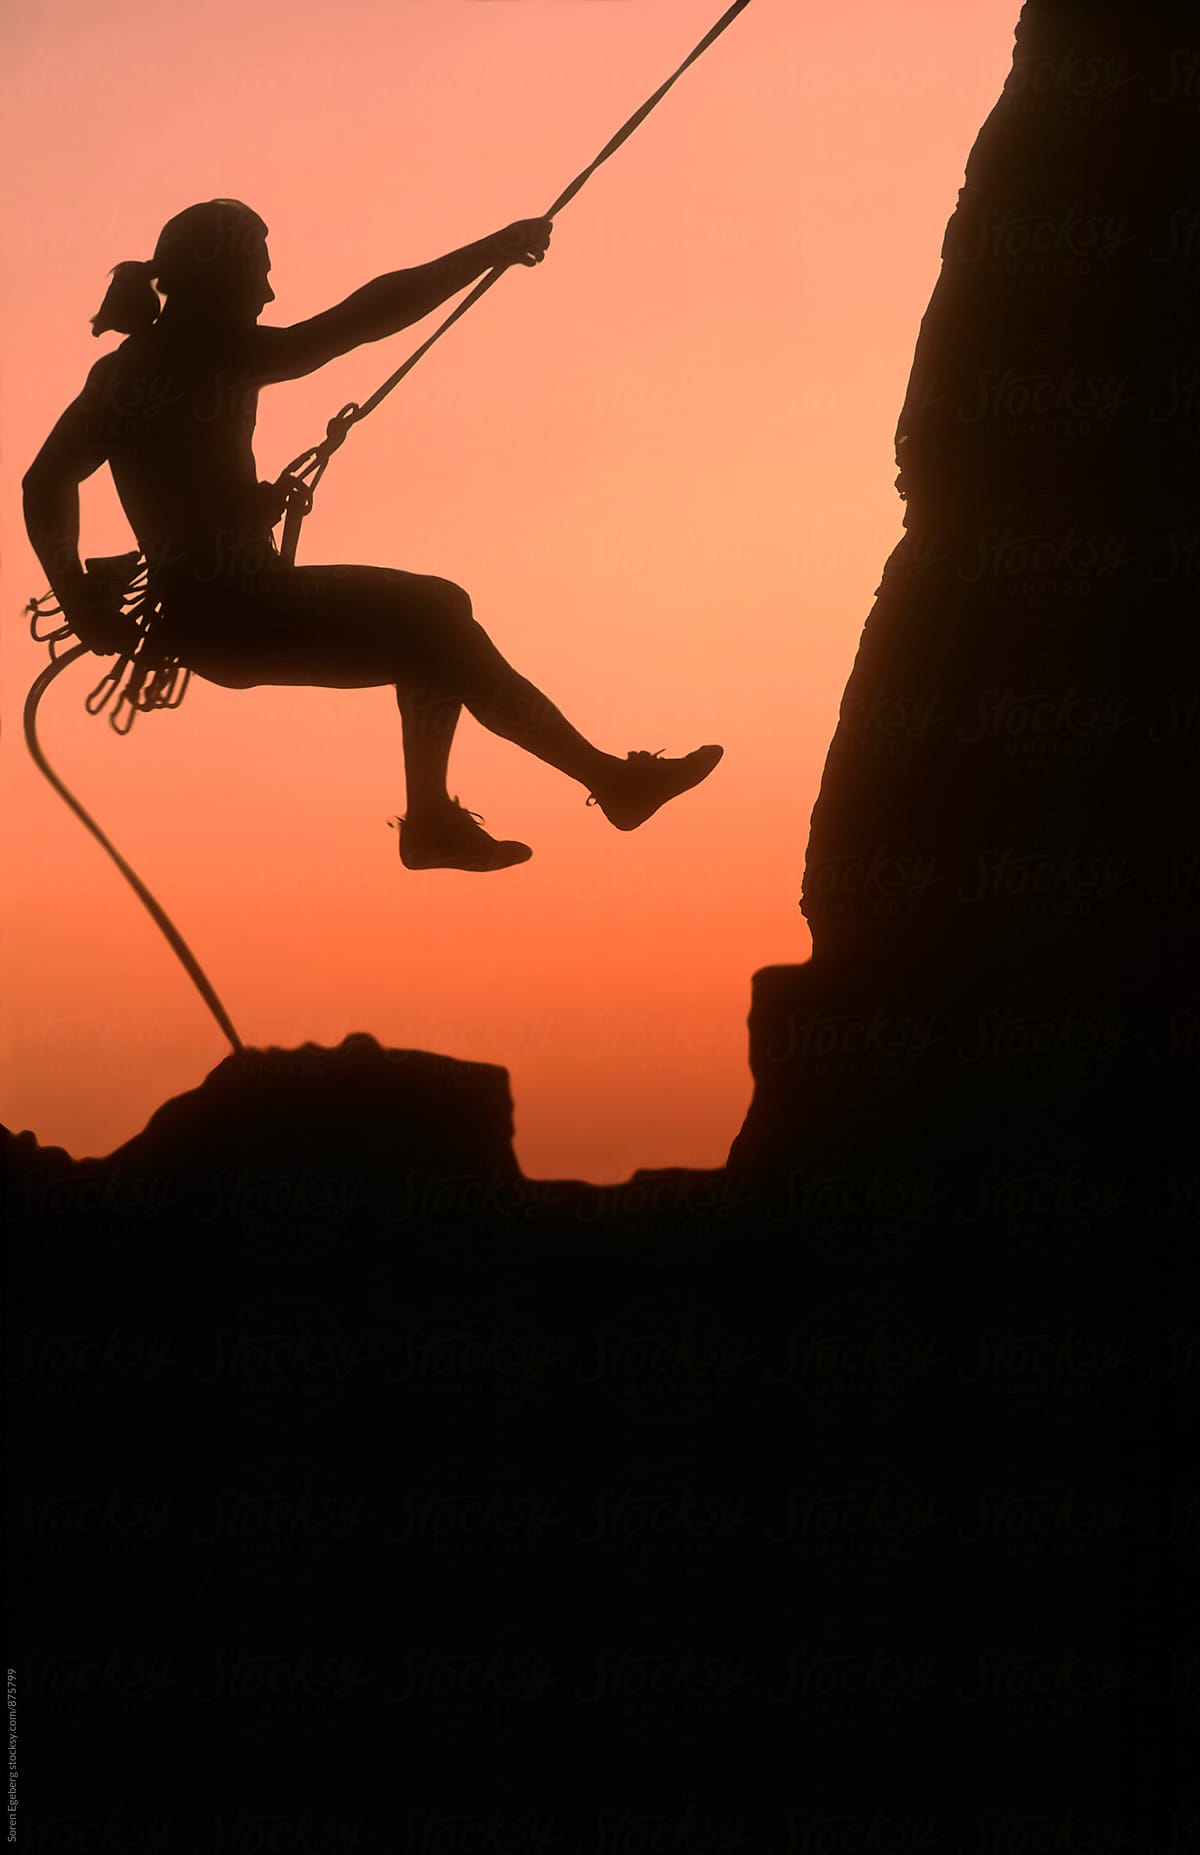 Silhouette of climber rapelling down a cliff face at sunset